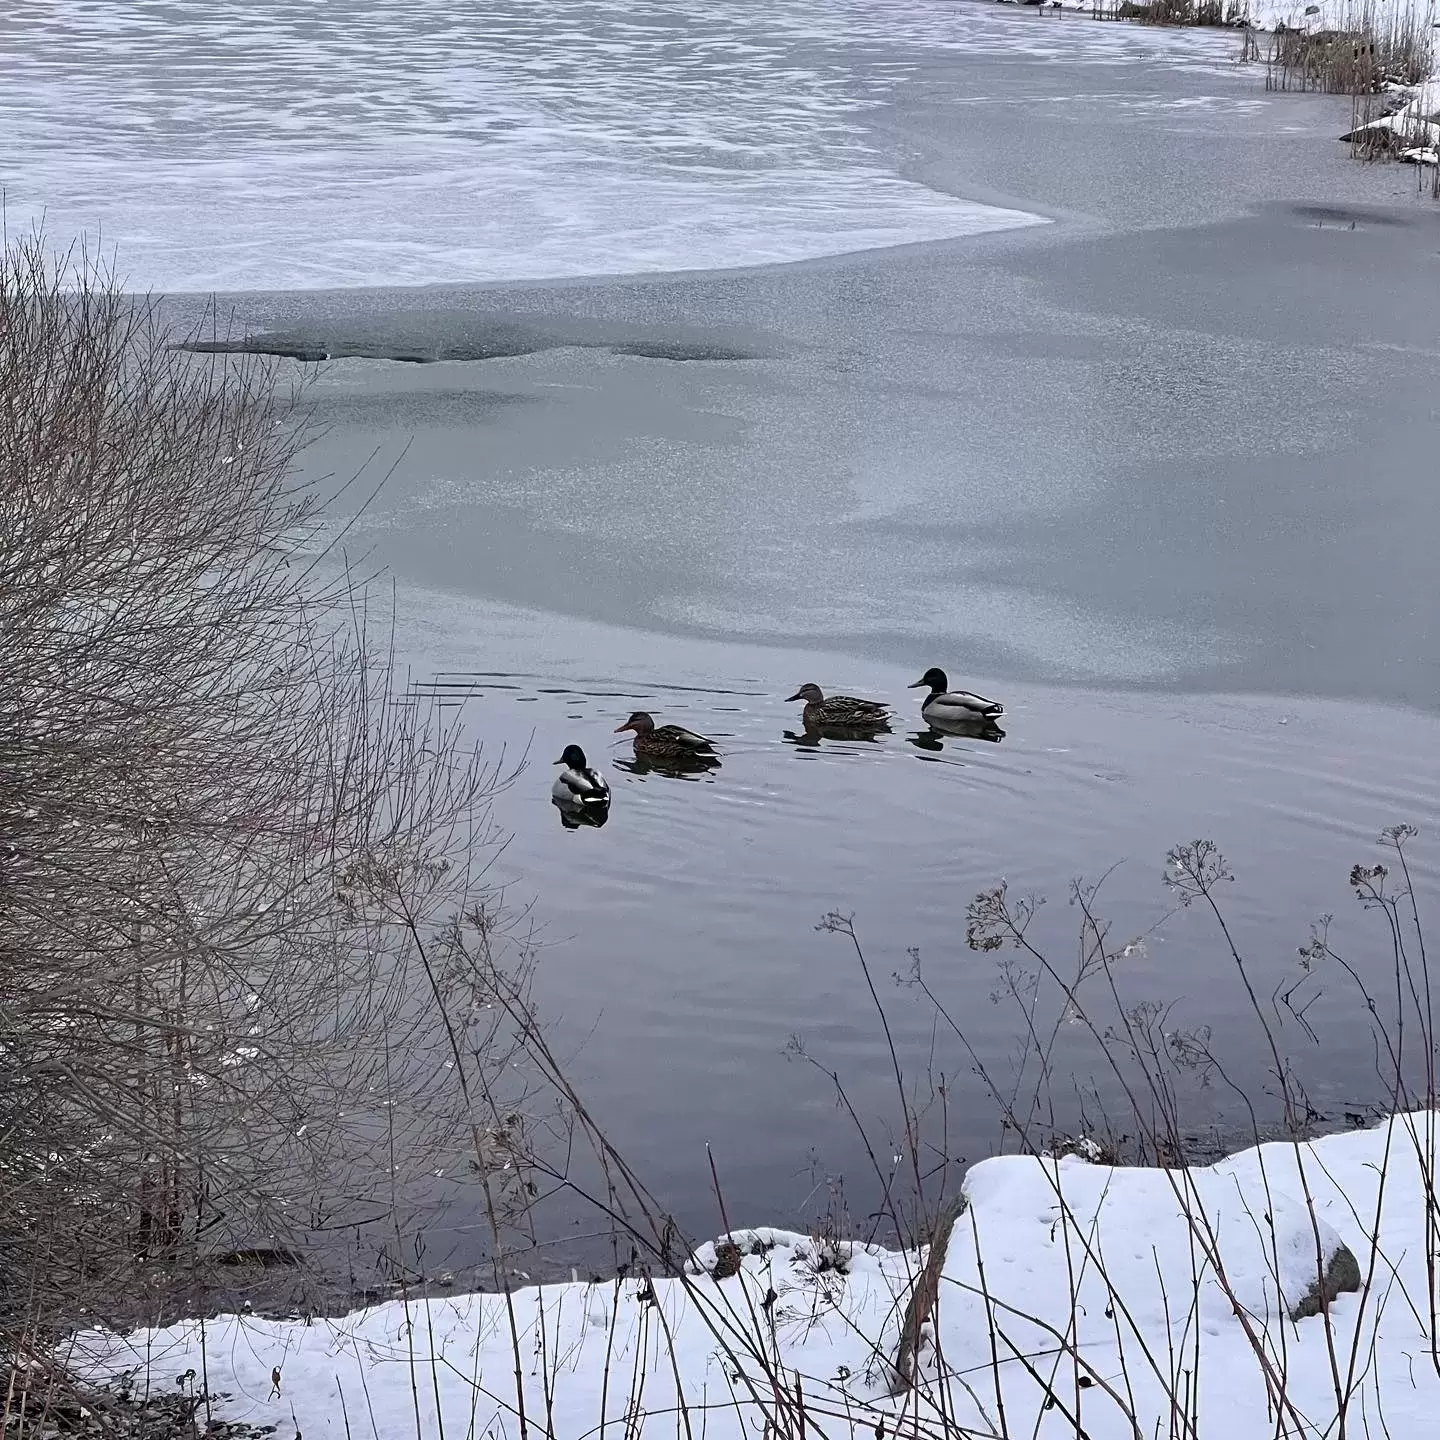 We had feathered friends visit our pond this morning! What feathered friends do you enjoy watching this time of year?

#freebird #ducks #livlikenoother #livforwildlife